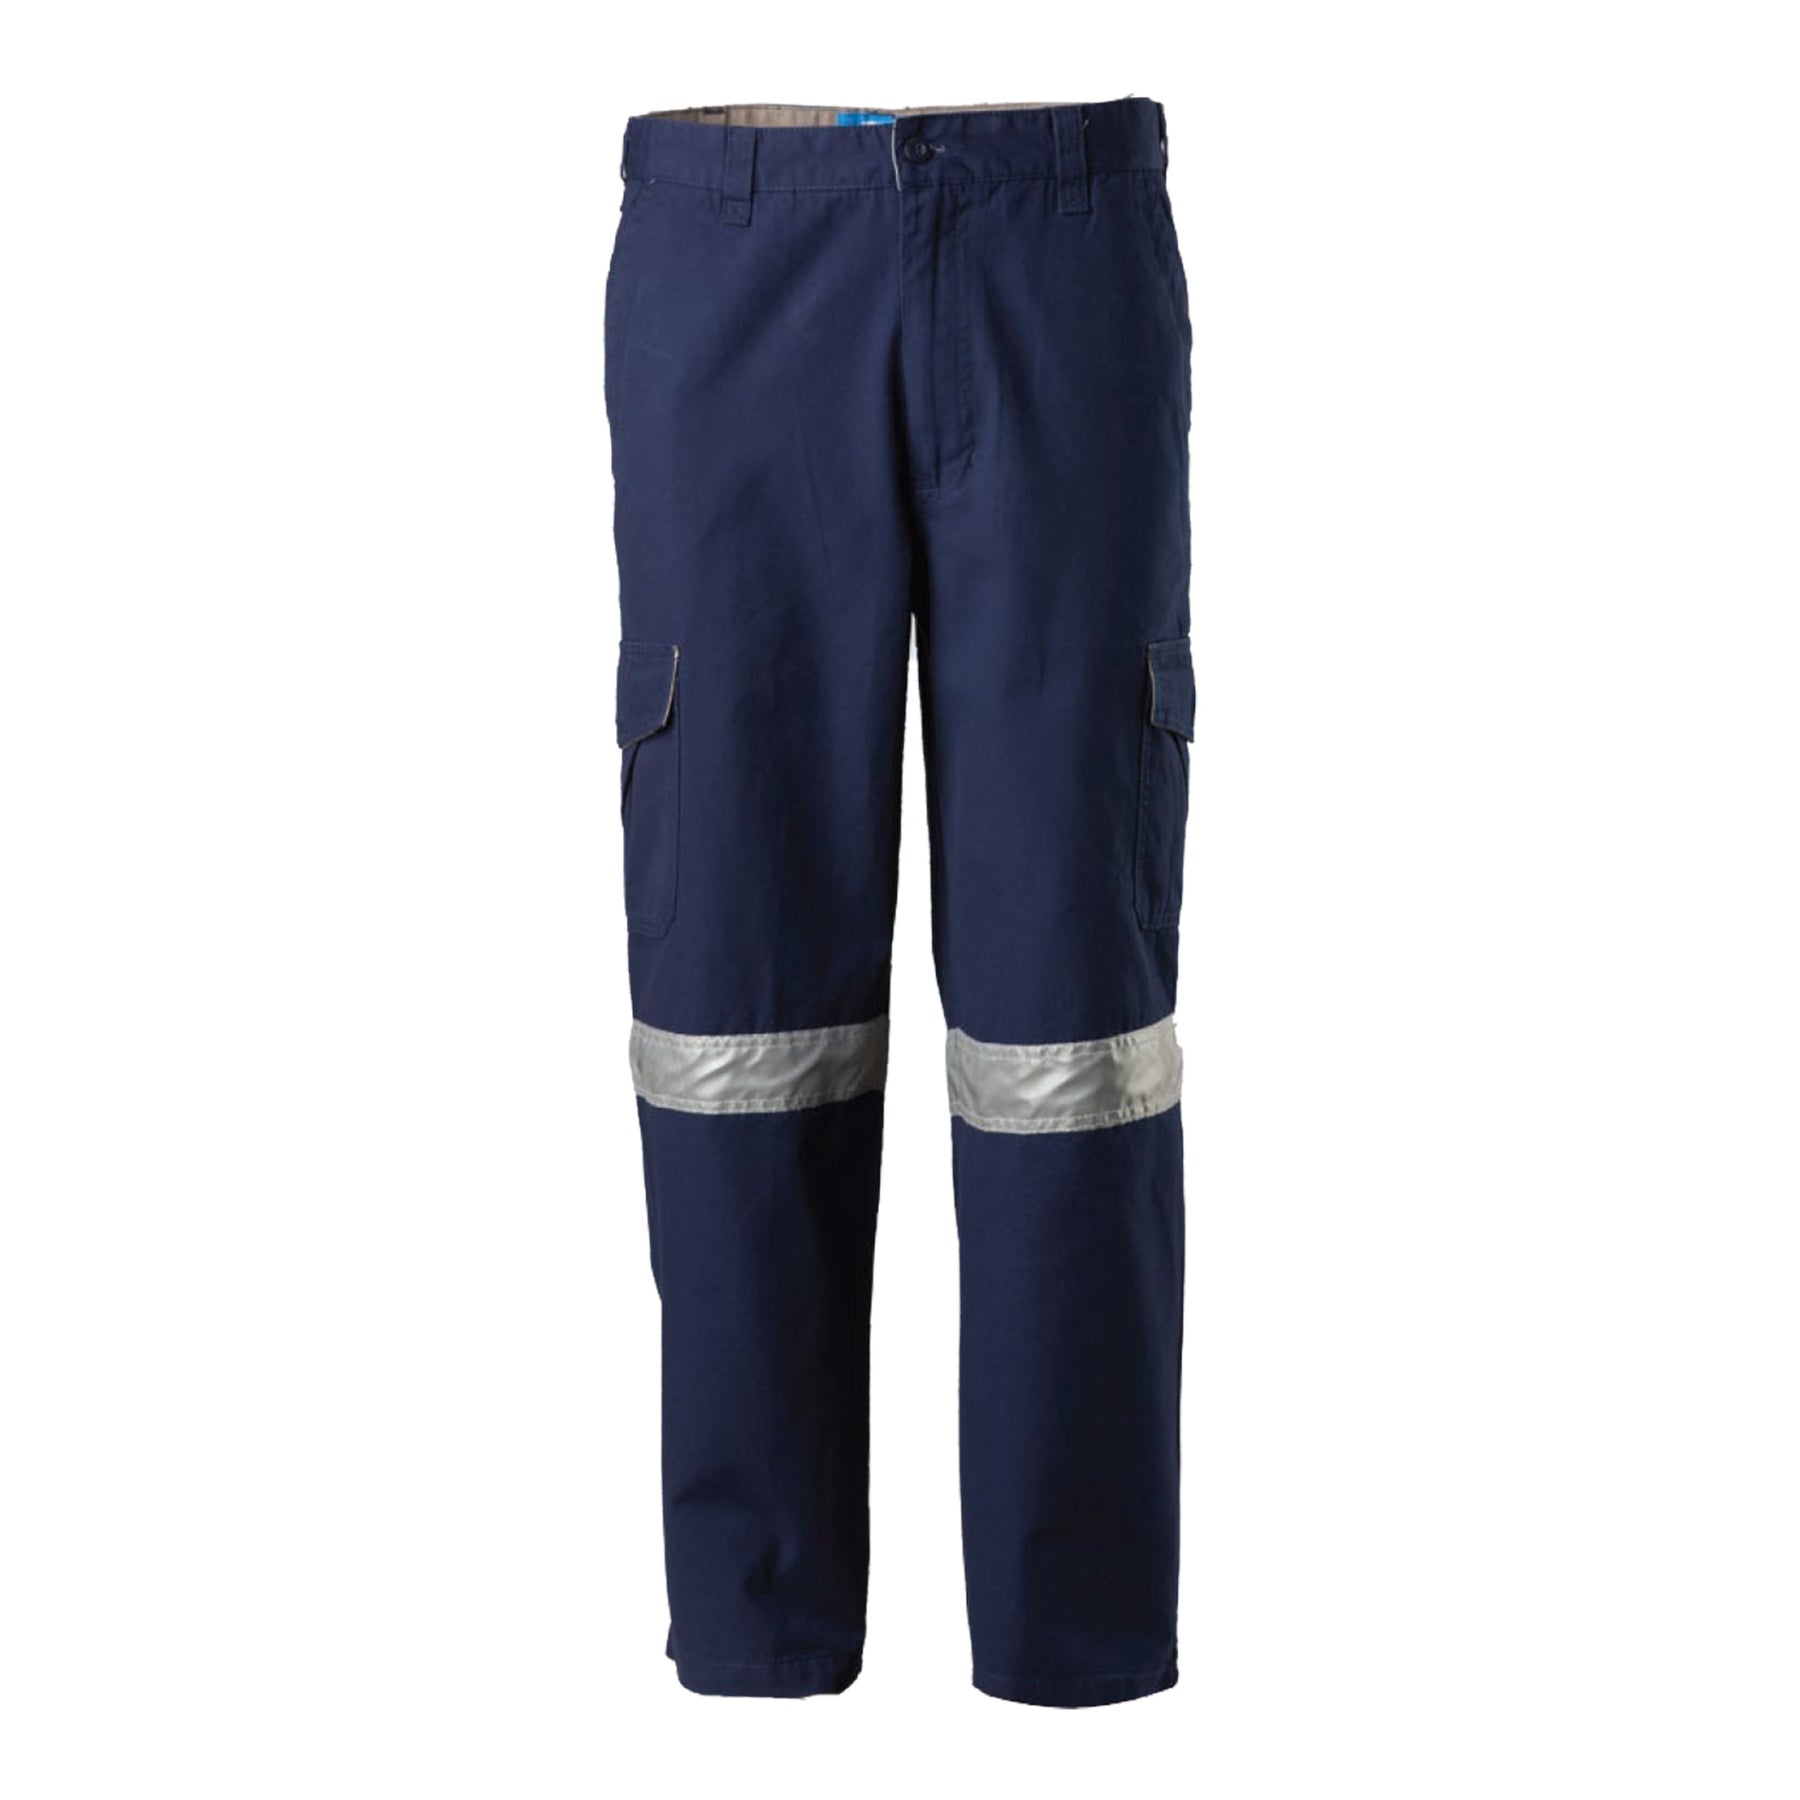 MID WEIGHT COTTON CARGO PANTS WITH 3M TAPE - DT1150T